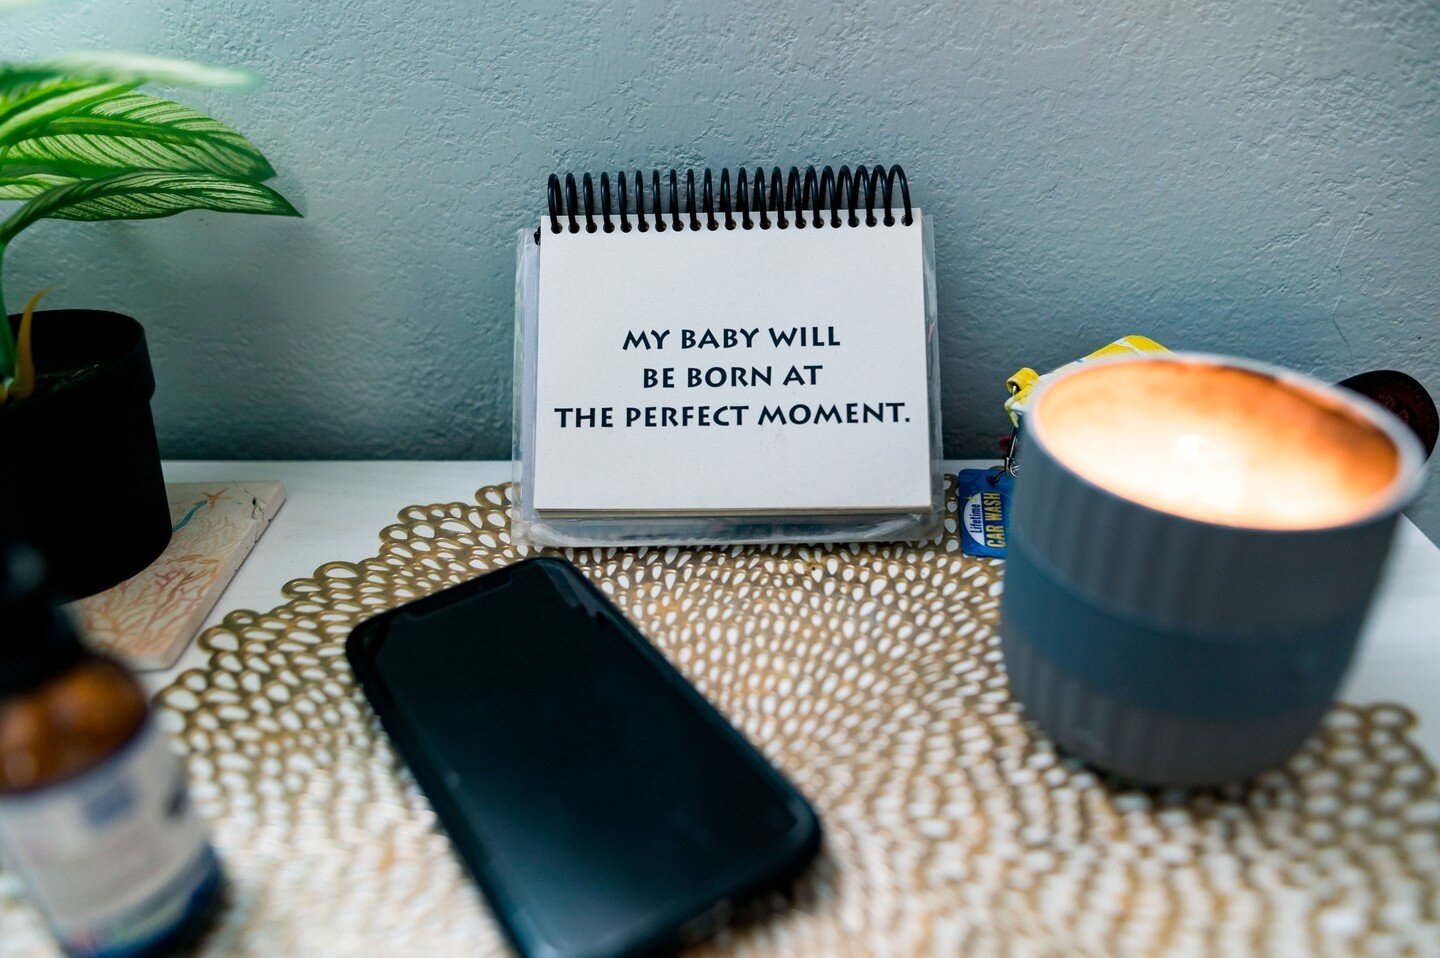 affirmations // @firstcoastmidwifery has a flip-book of birth affirmations in the beach room. After every birth, the midwives flip it to the next card, awaiting the next birth. I couldn't help but chuckle when I saw this one, since this baby was born